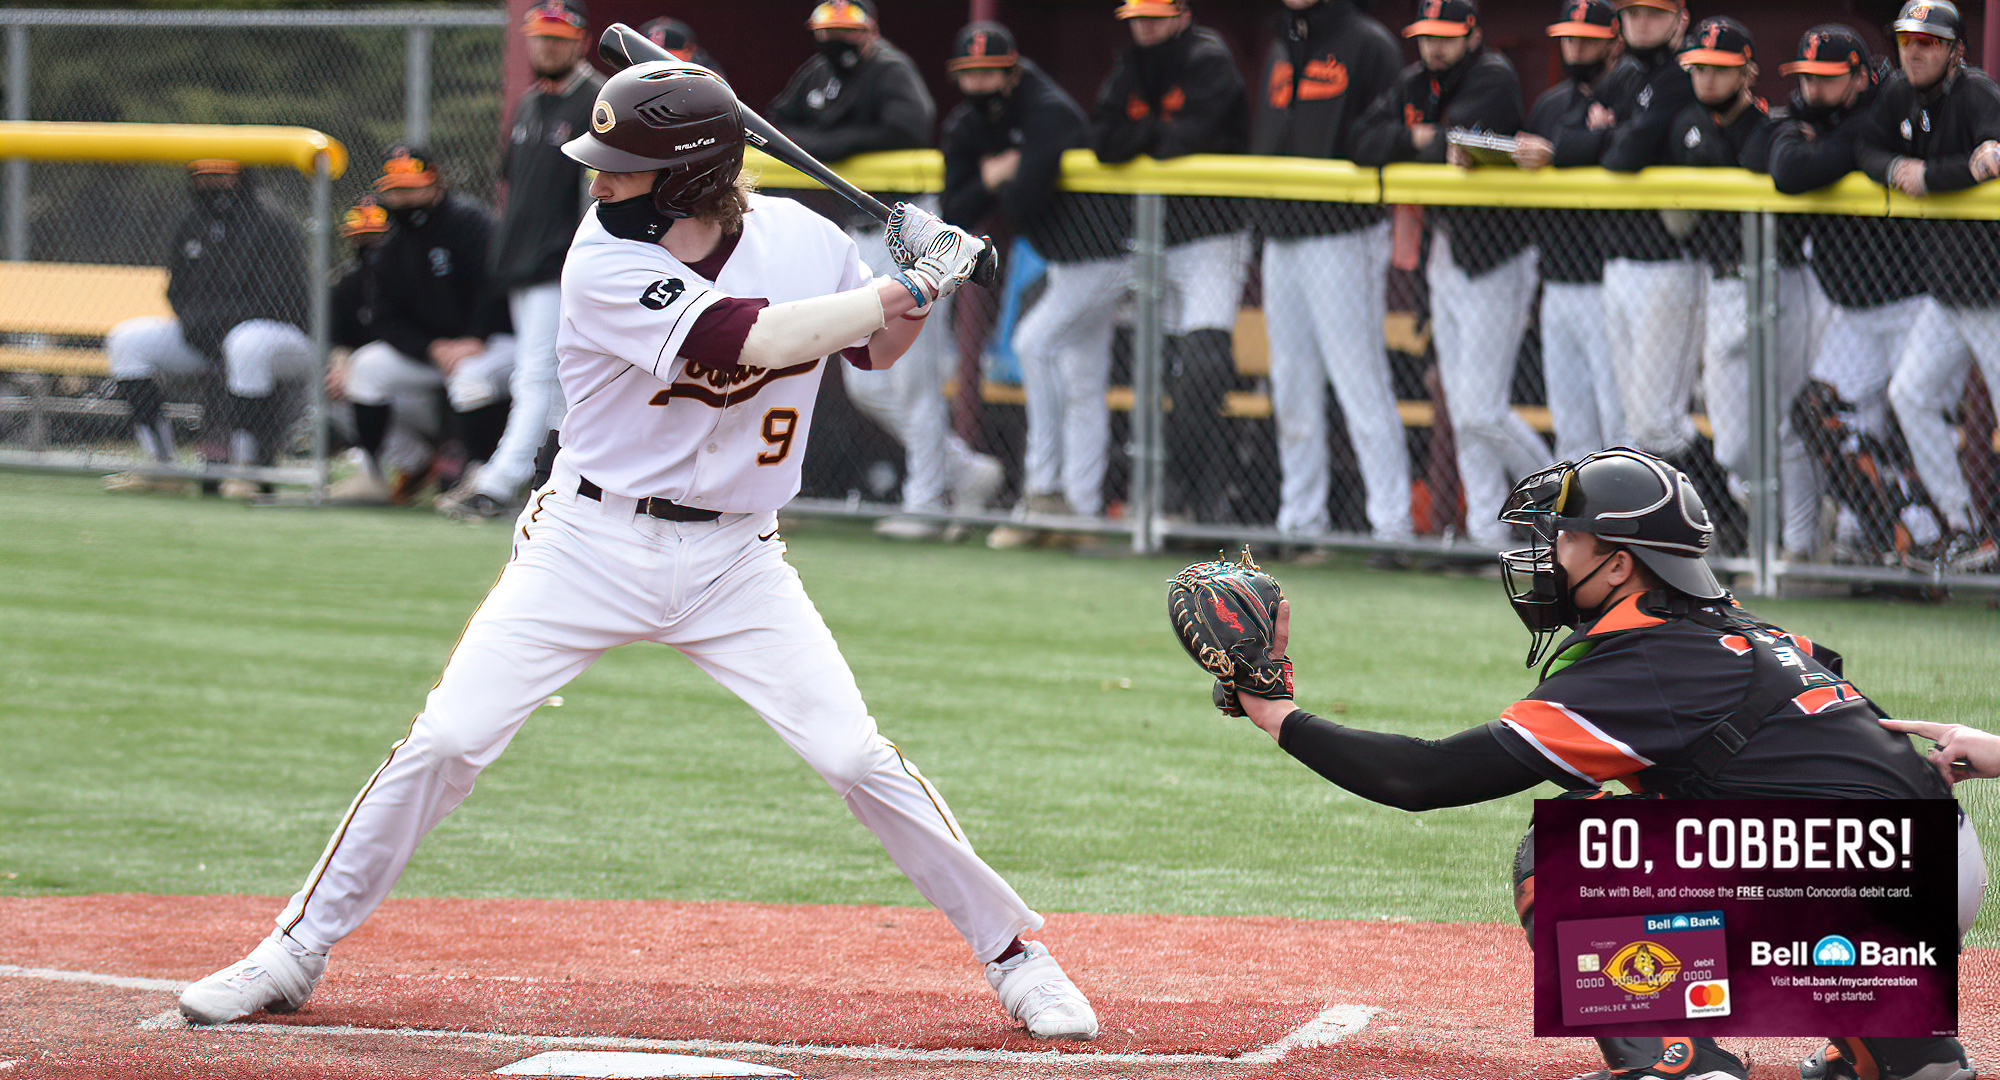 Sophomore Thomas Horan hit his first collegiate home run and had three hits in the Cobbers' game at Jamestown. He is now seventh in the MIAC in both batting average and RBI.